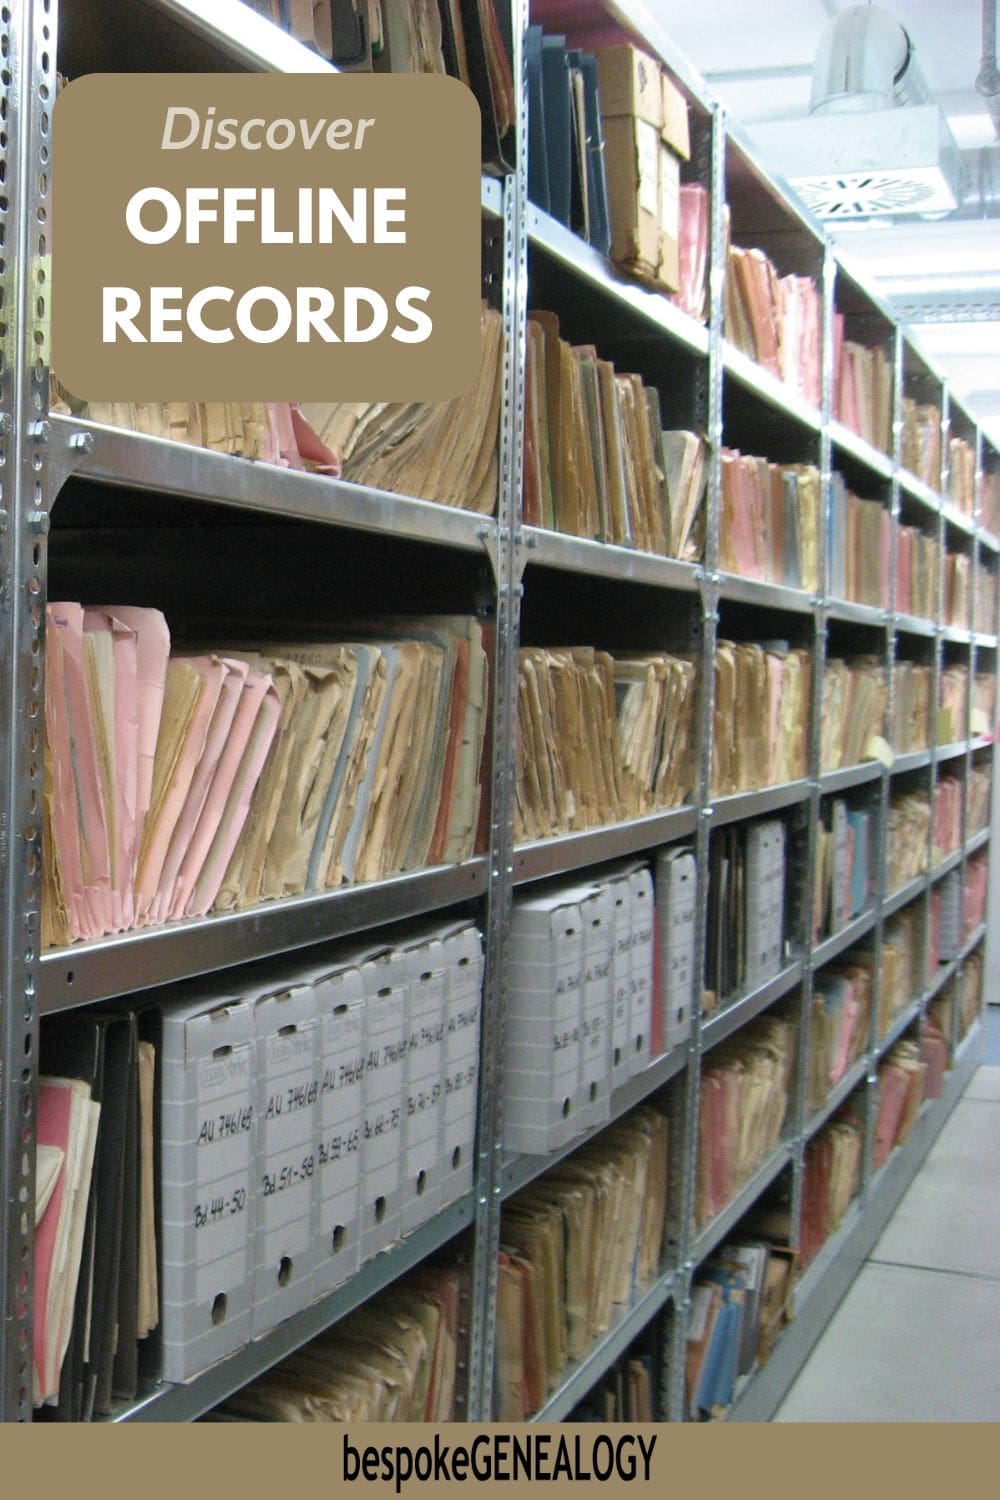 Discover Offline Records. Photo of some shelves in an archive containing files of documents